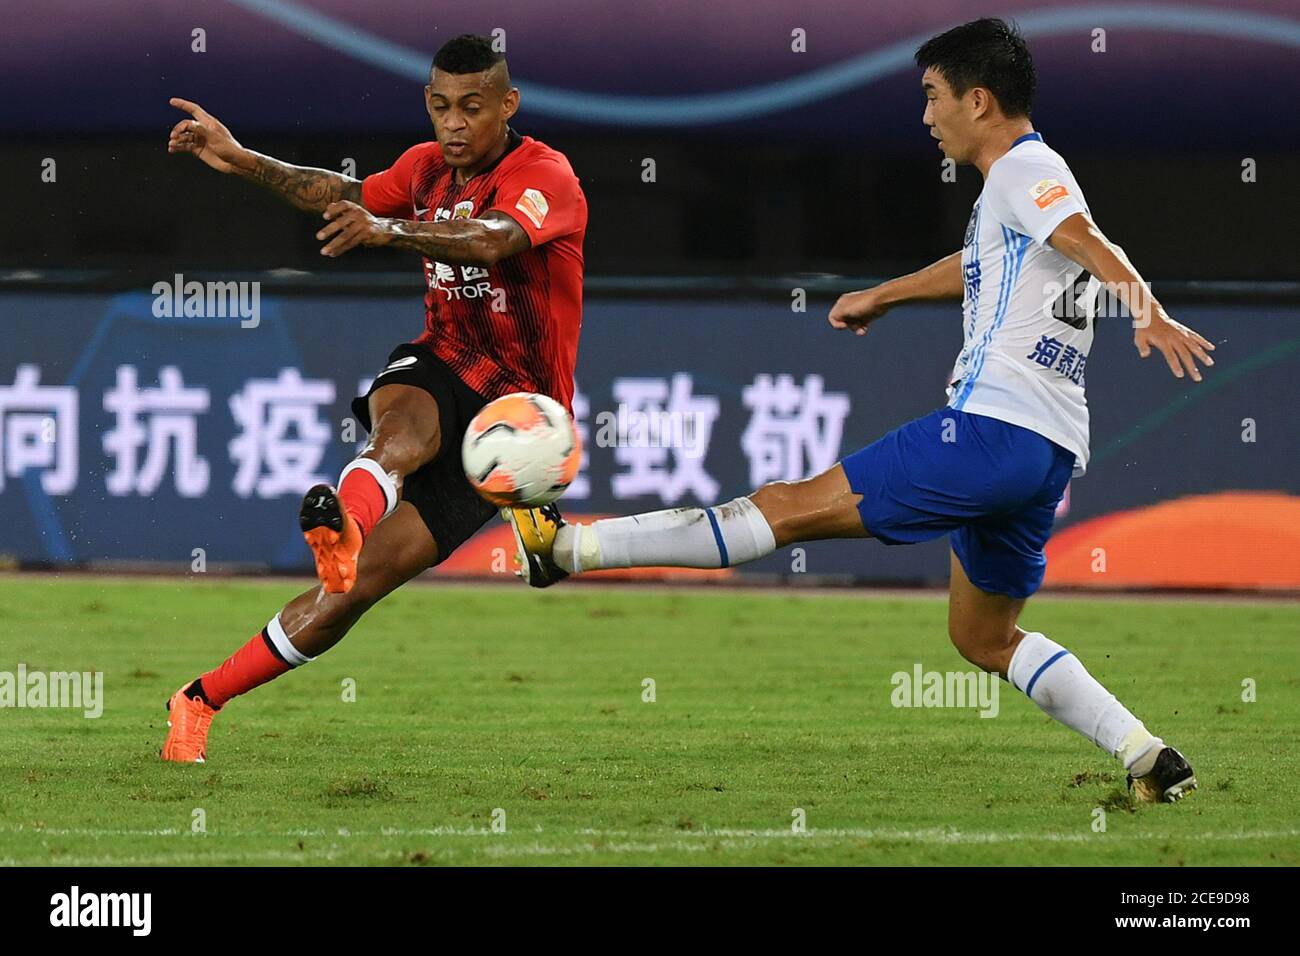 Suzhou, China's Jiangsu Province. 31st Aug, 2020. Ricardo Lopez (L) of Shanghai SIPG shoots the ball during the 8th round match between Shanghai SIPG and Tianjin TEDA at the postponed 2020 season Chinese Football Association Super League (CSL) Suzhou Division in Suzhou, east China's Jiangsu Province, Aug. 31, 2020. Credit: Han Yuqing/Xinhua/Alamy Live News Stock Photo